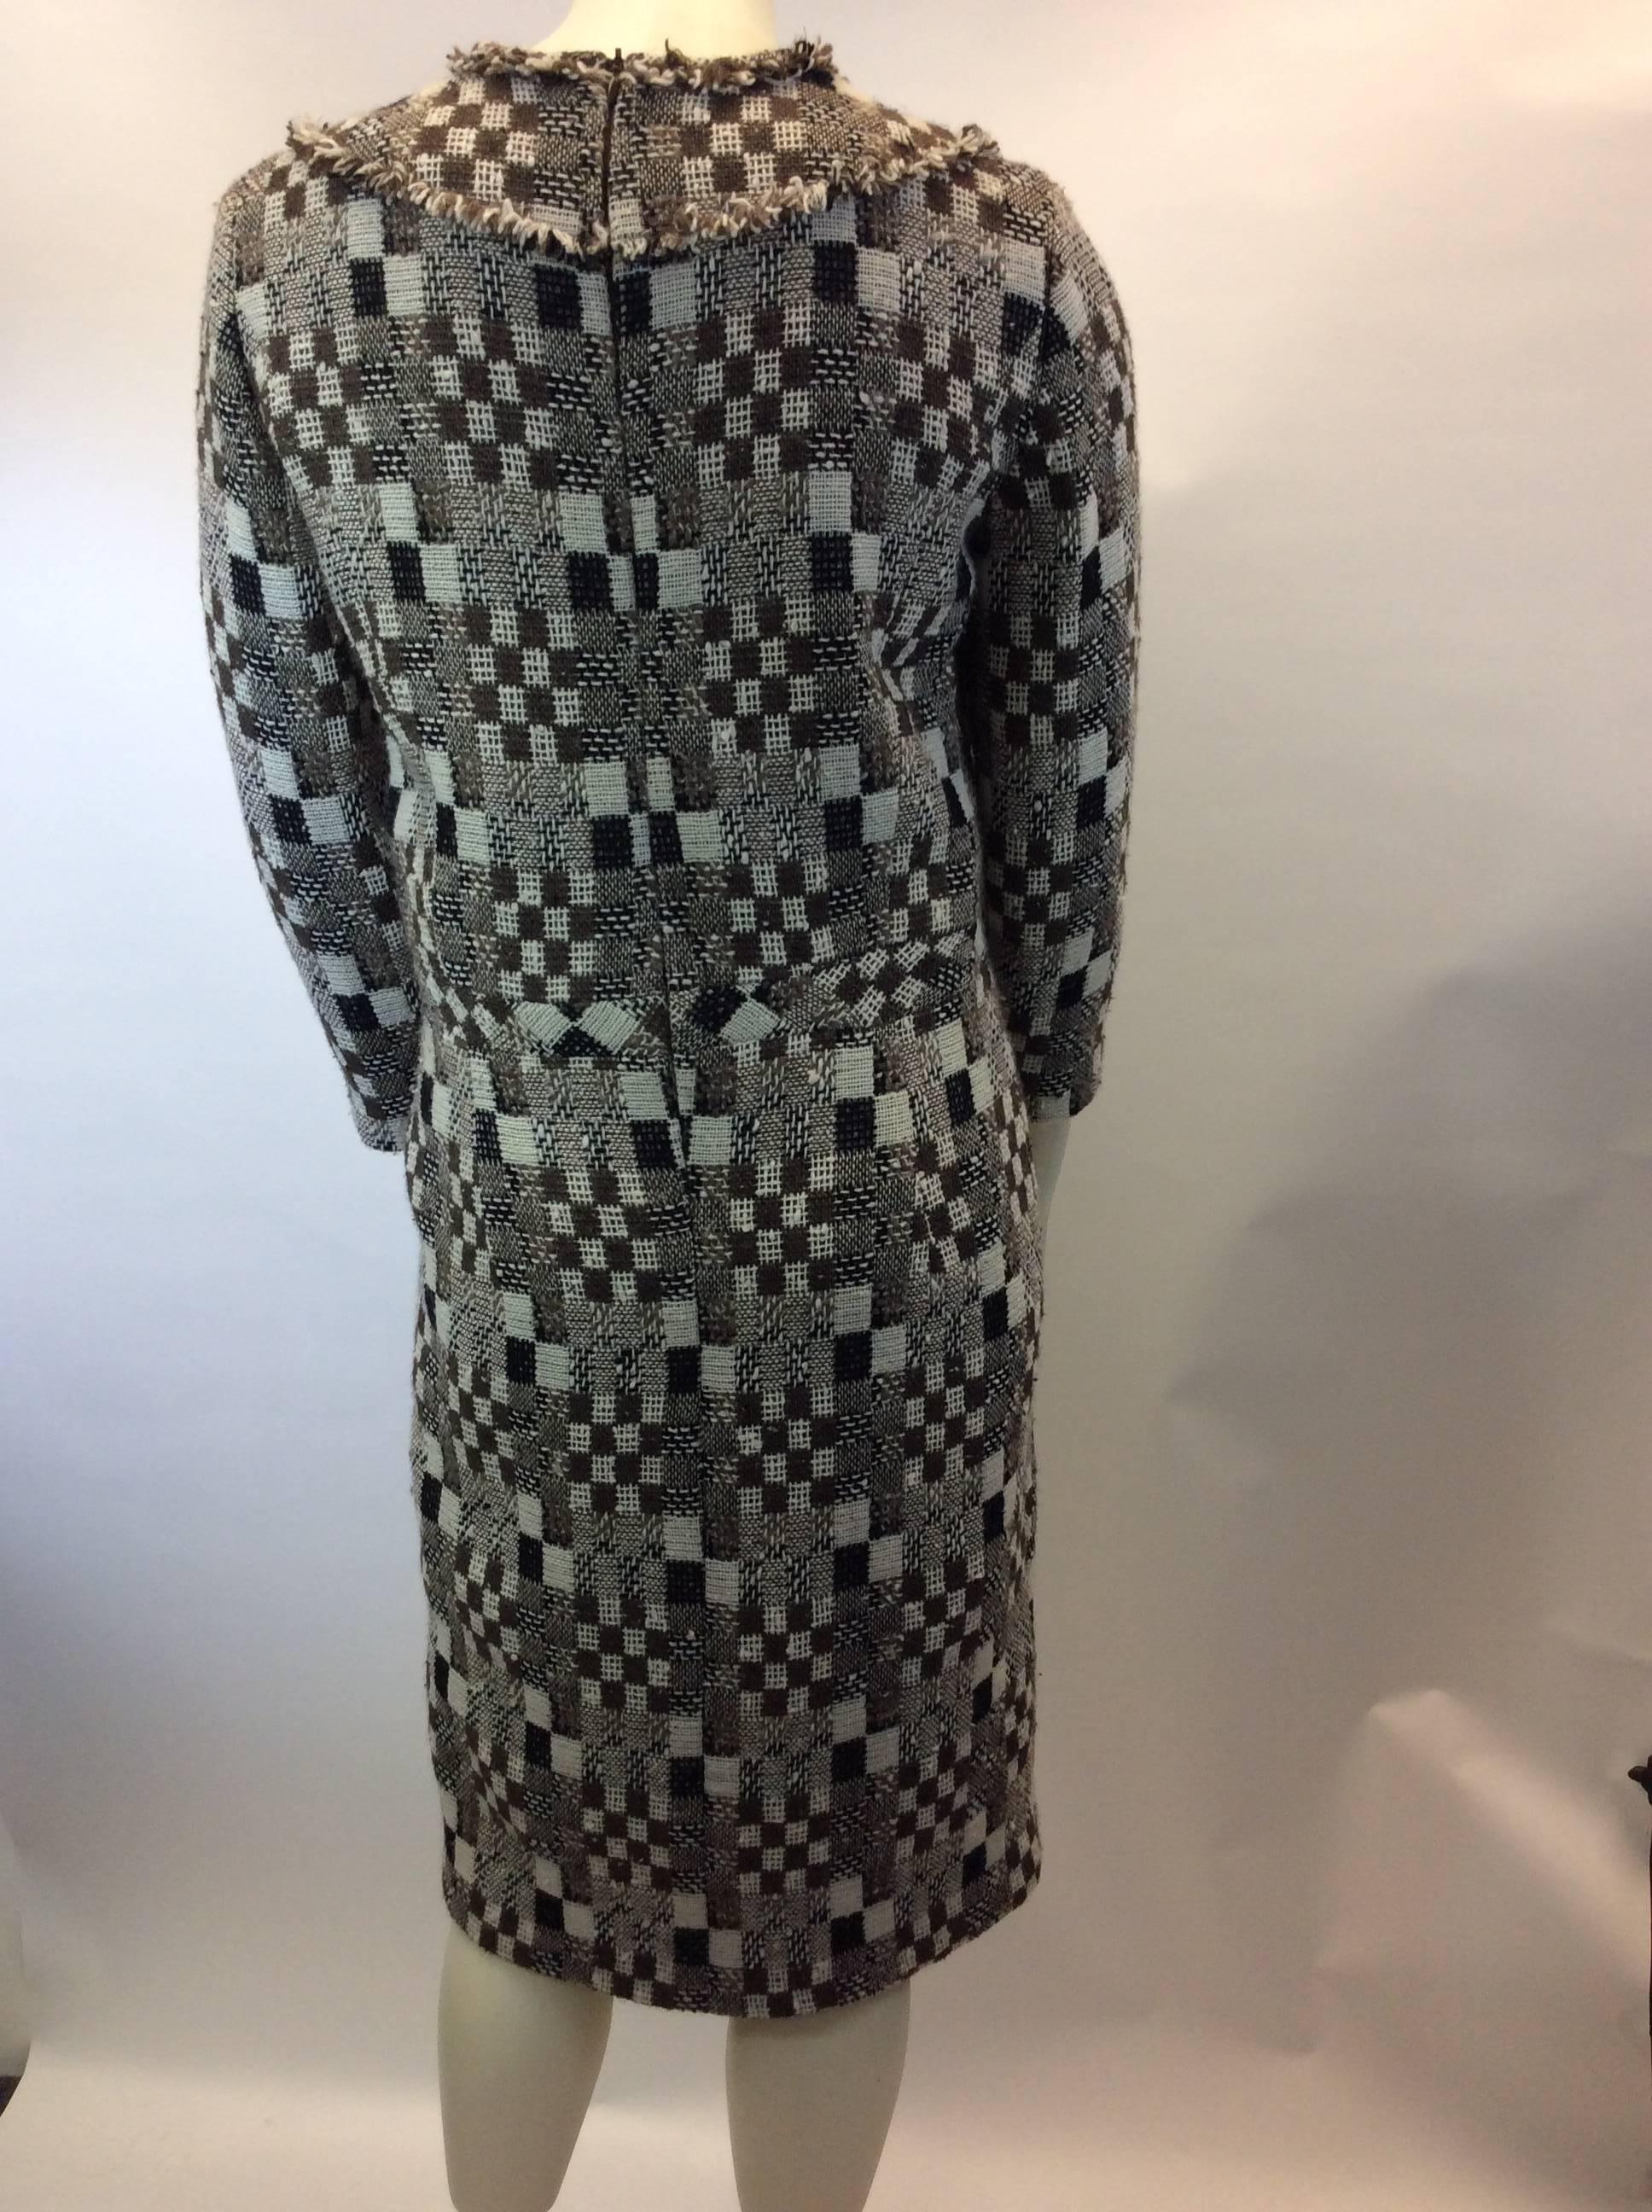 Oscar De La Renta Wool Dress In Excellent Condition For Sale In Narberth, PA